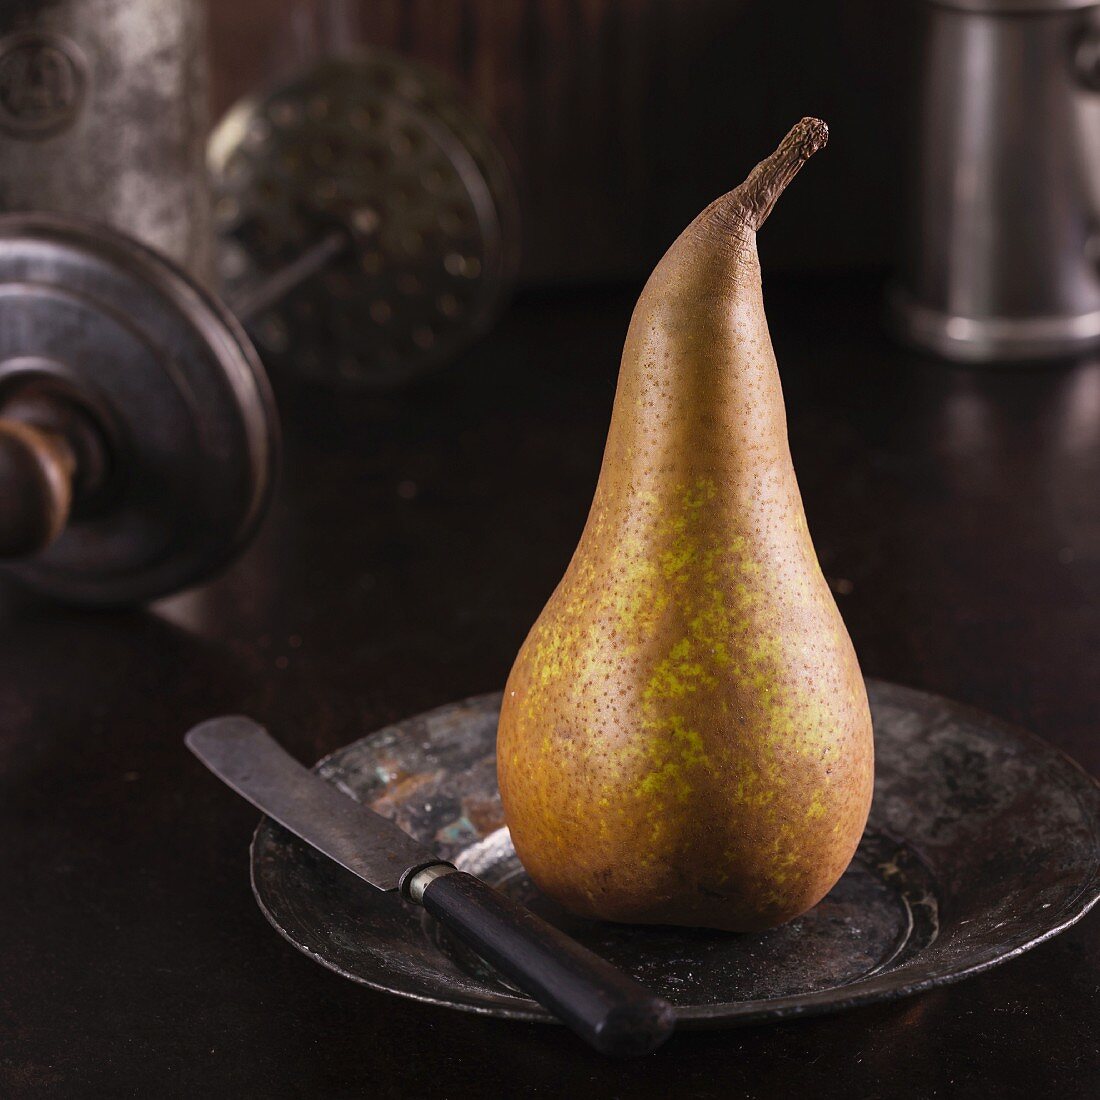 Raw pear on rustic background.